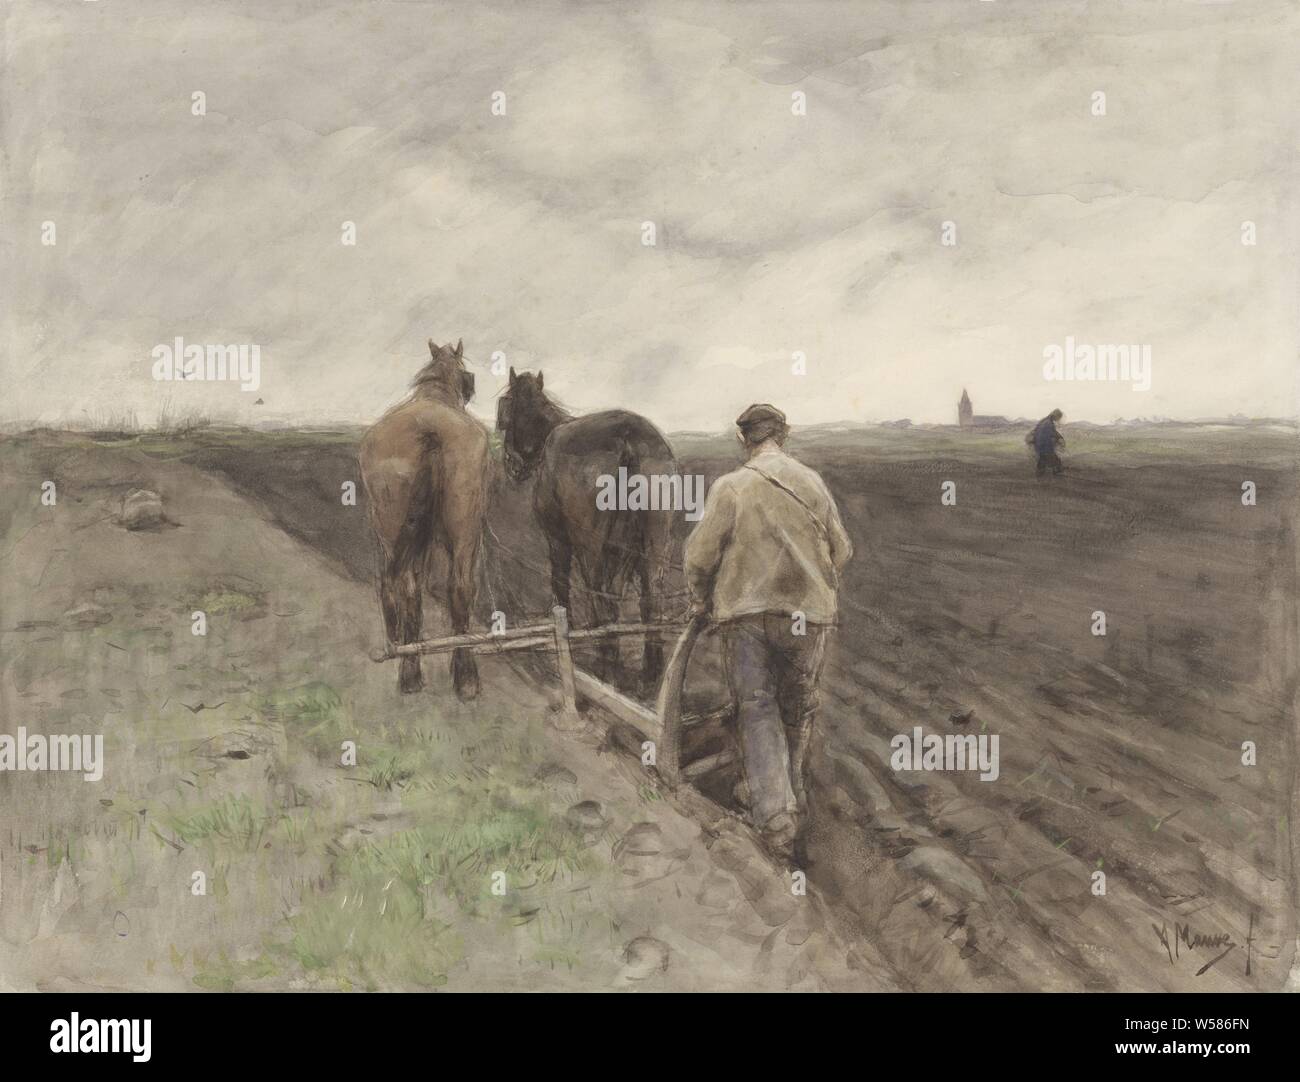 Farmer behind the Plow, plowing, Anton Mauve (mentioned on object), c. 1885, paper, brush, h 458 mm × w 600 mm Stock Photo